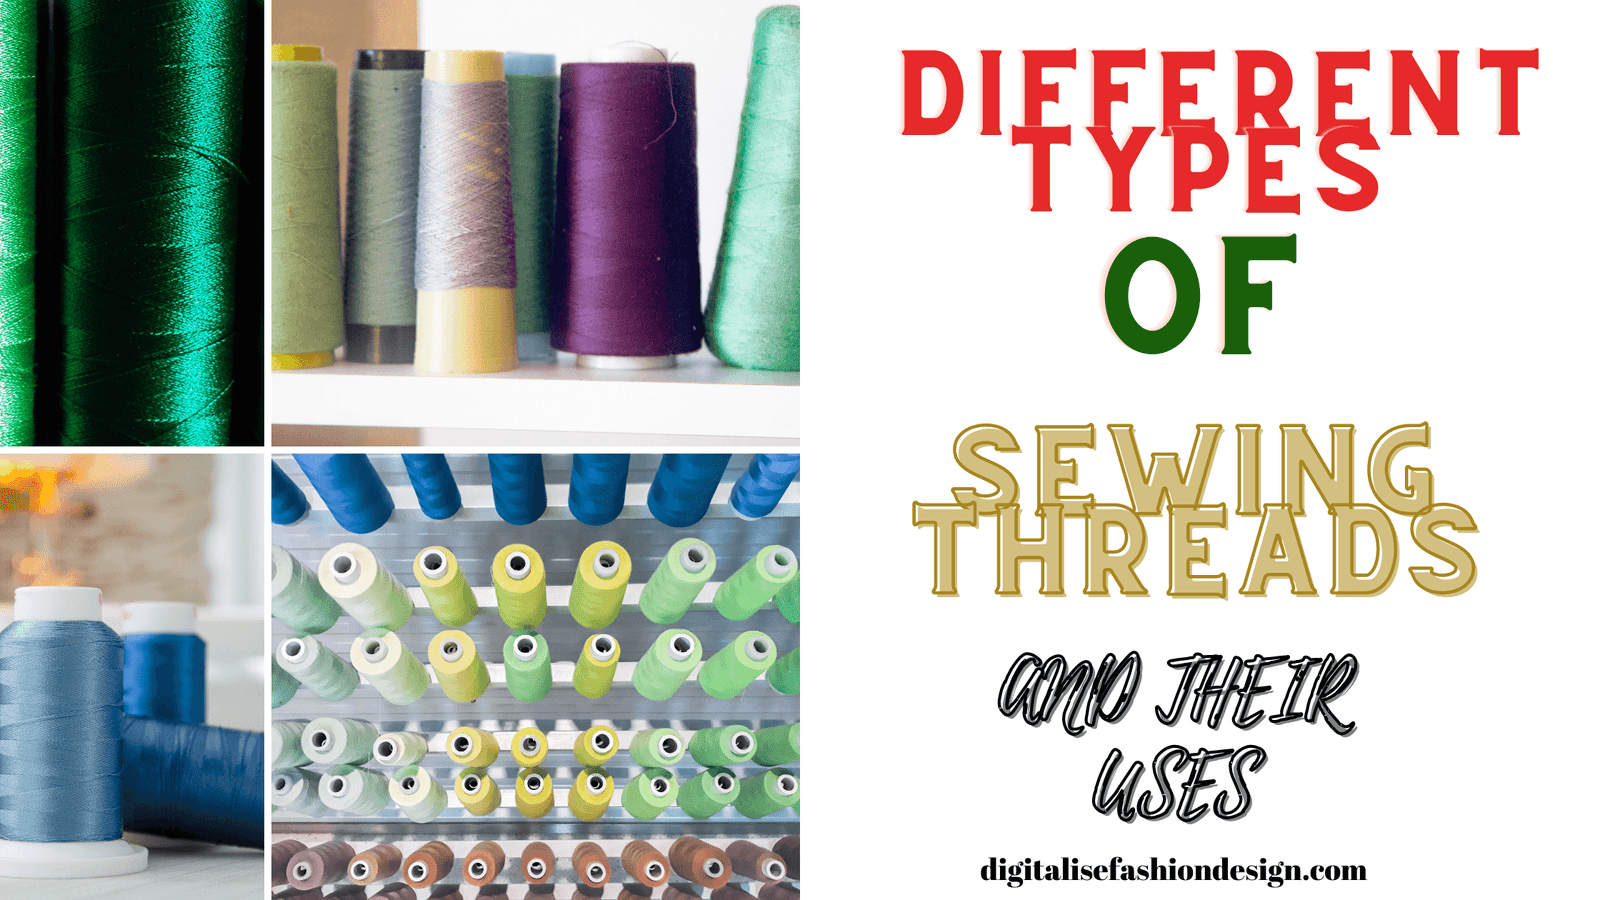 You are currently viewing DIFFERENT TYPES OF SEWING THREADS AND THEIR USES: